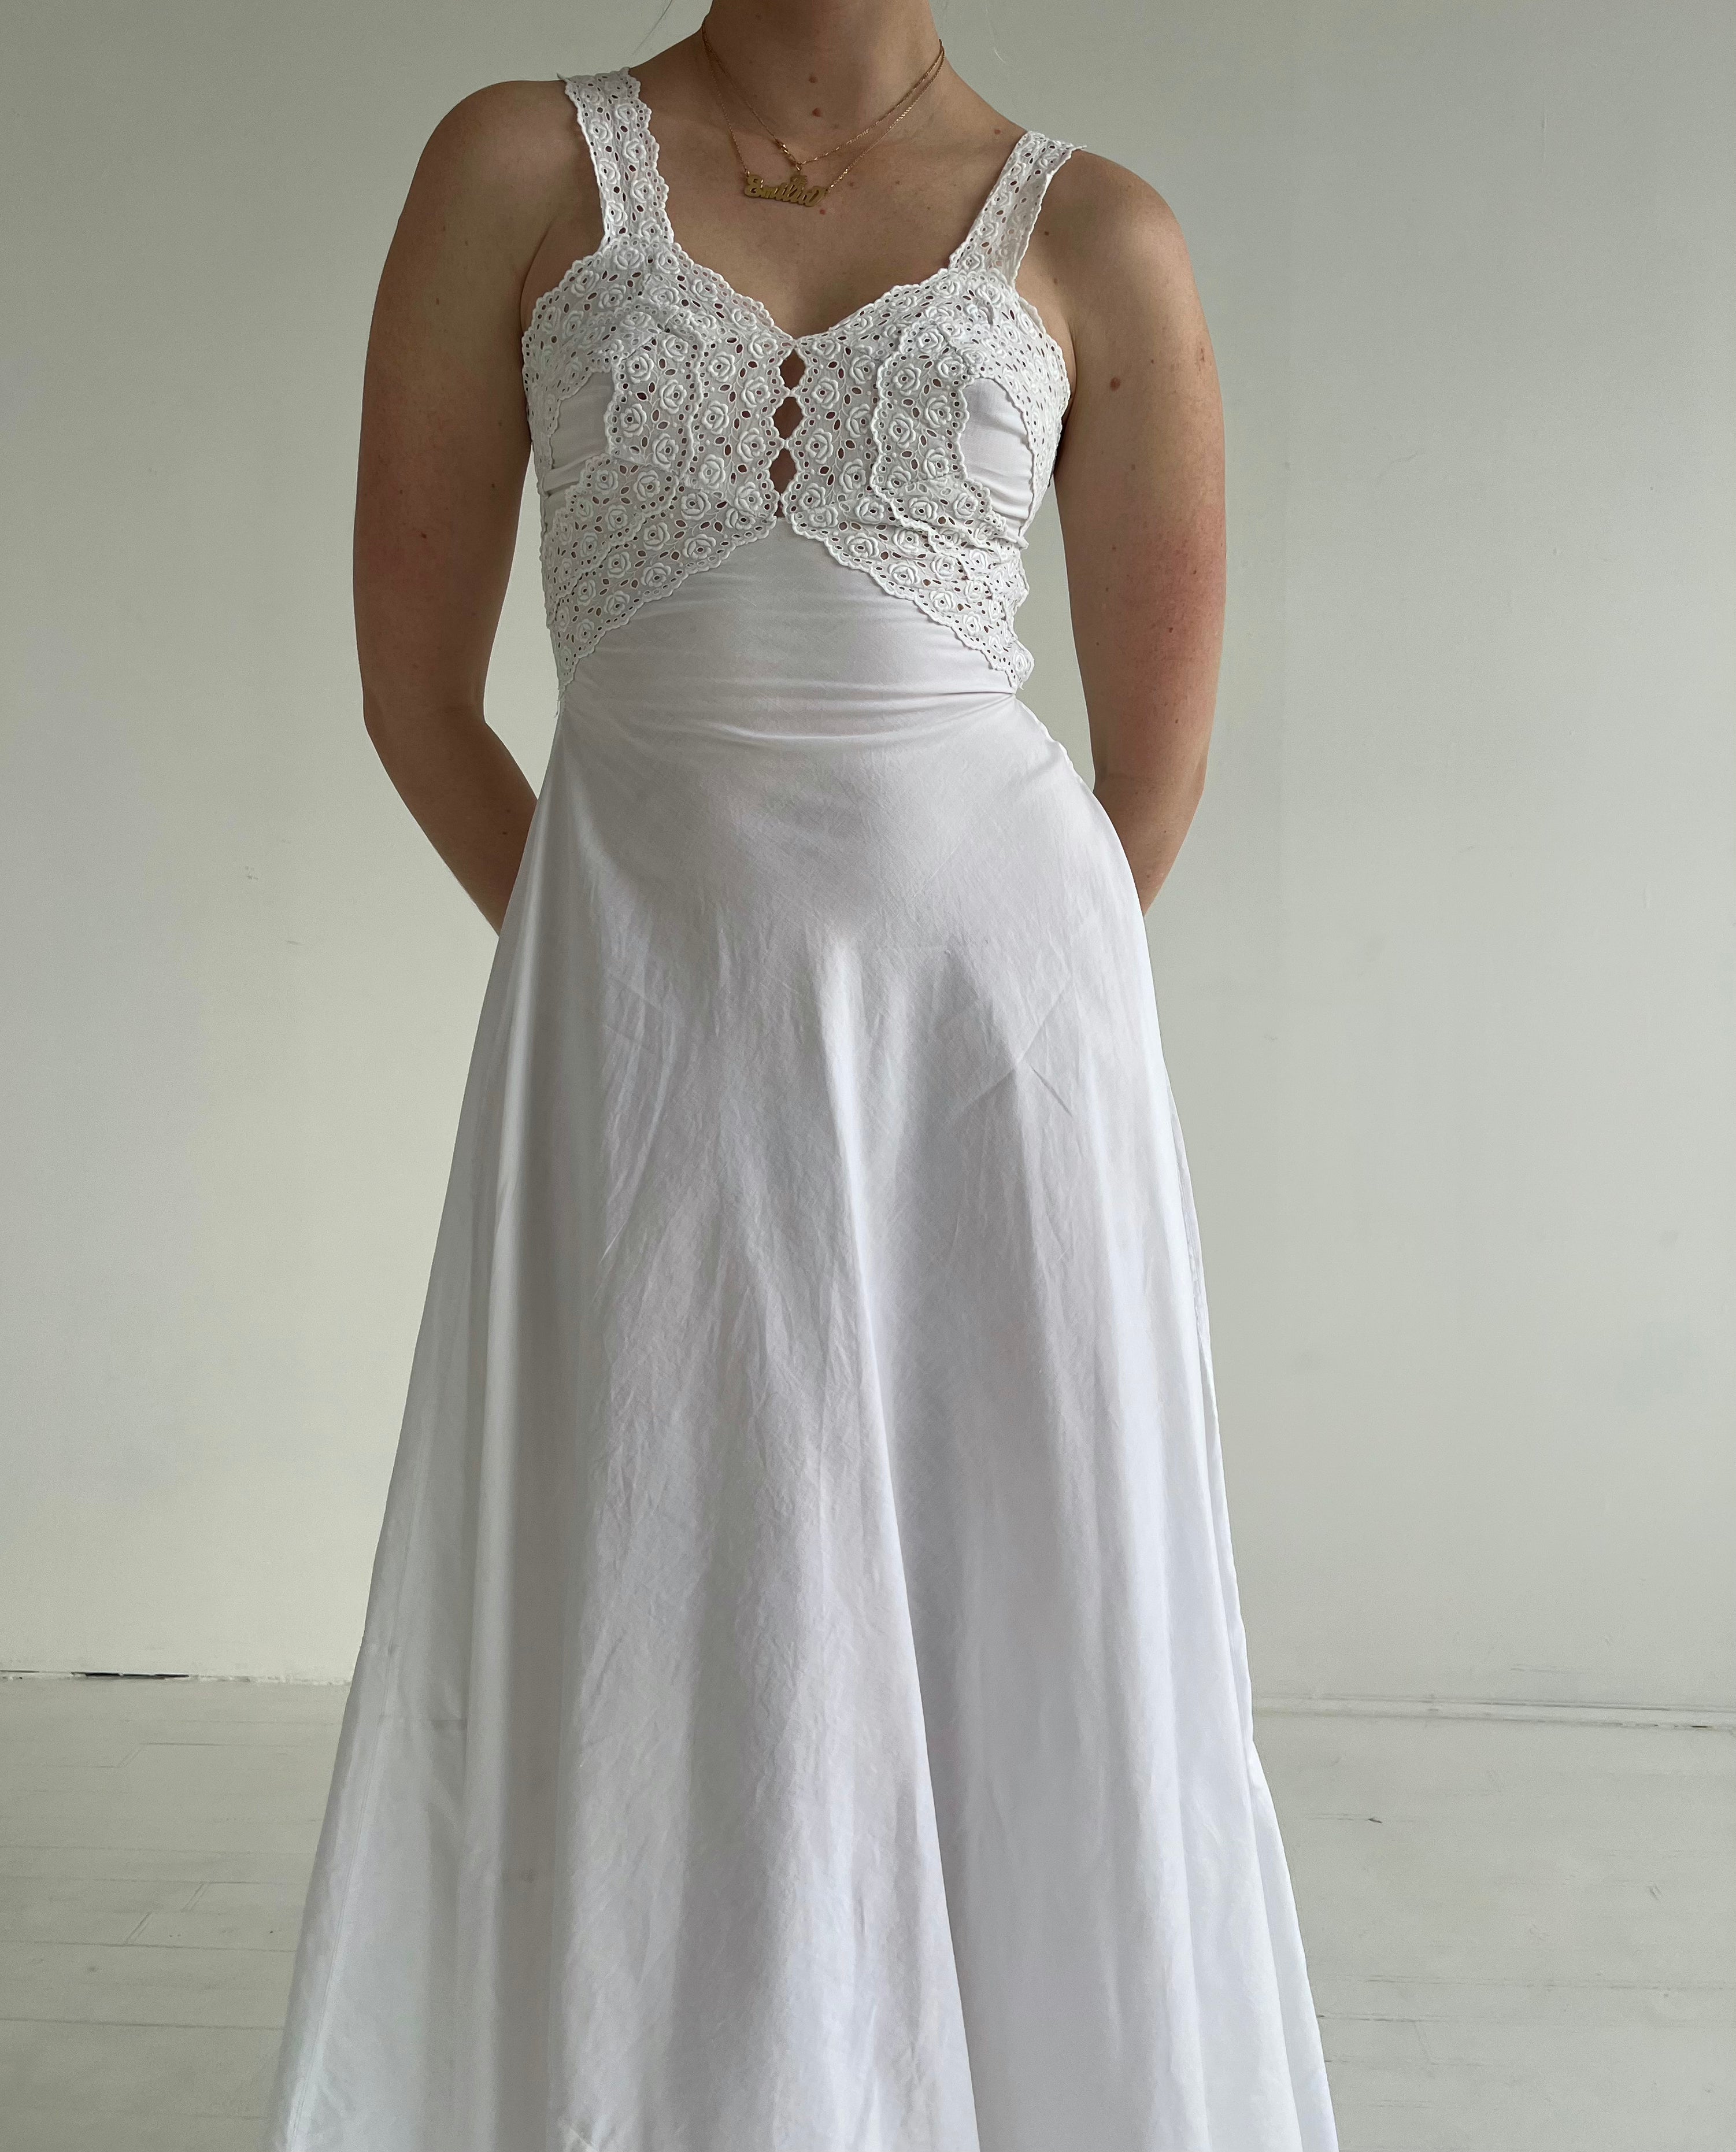 1970's Bridal White Cotton Dress with Lace